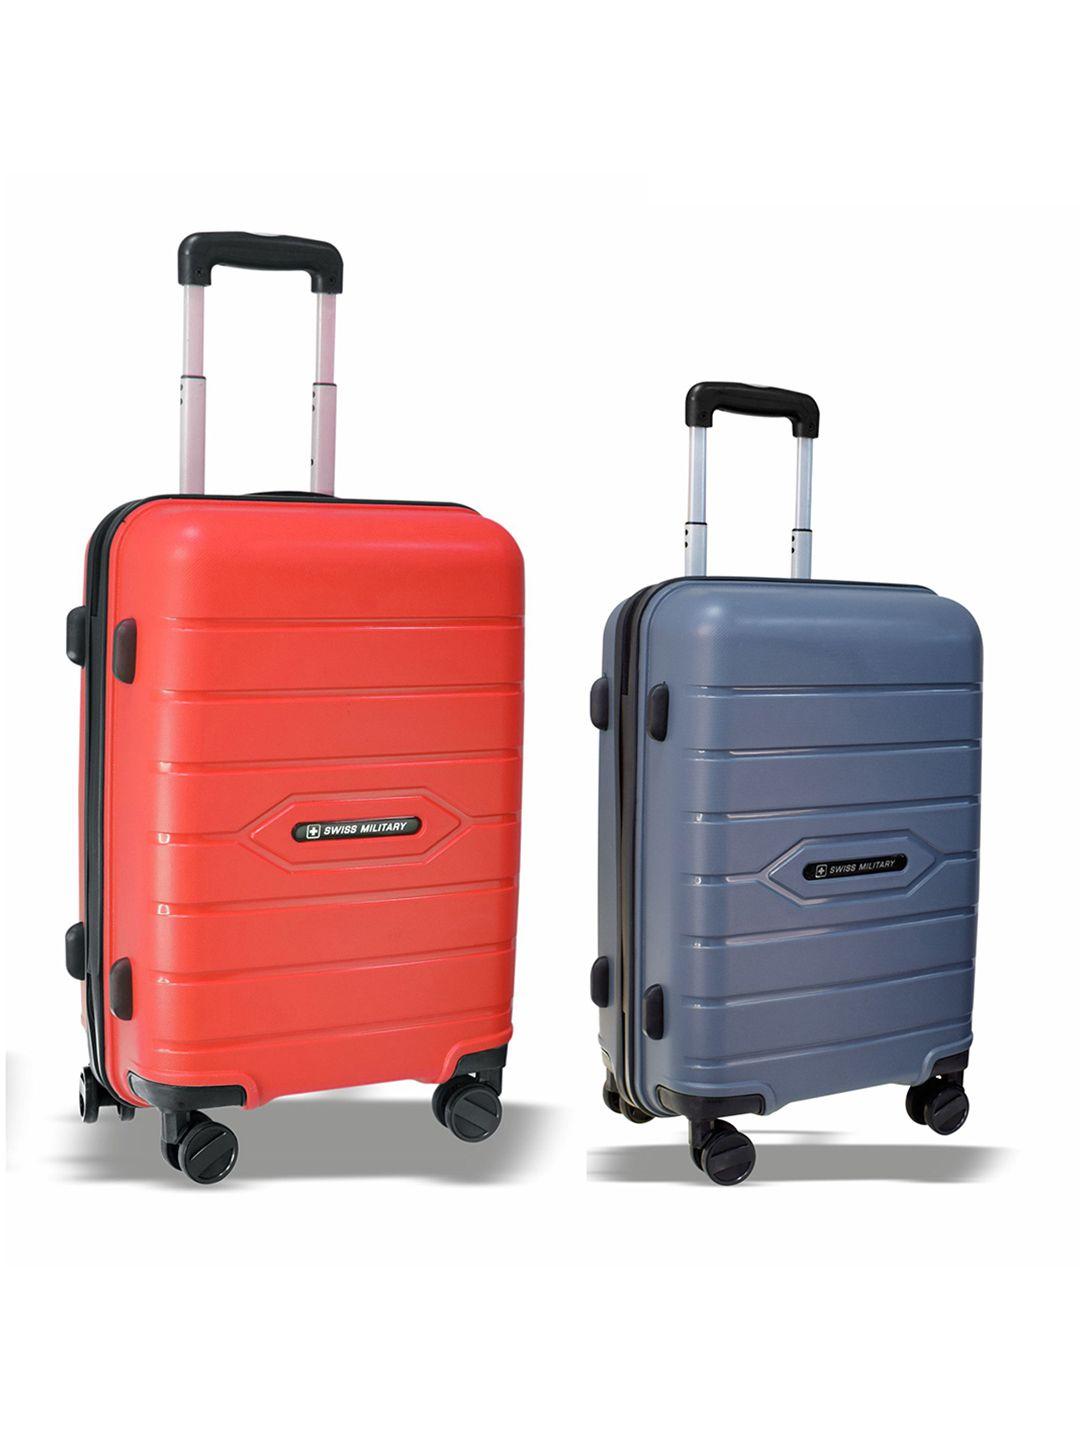 swiss military set of 2 solid hard-sided trolley suitcases